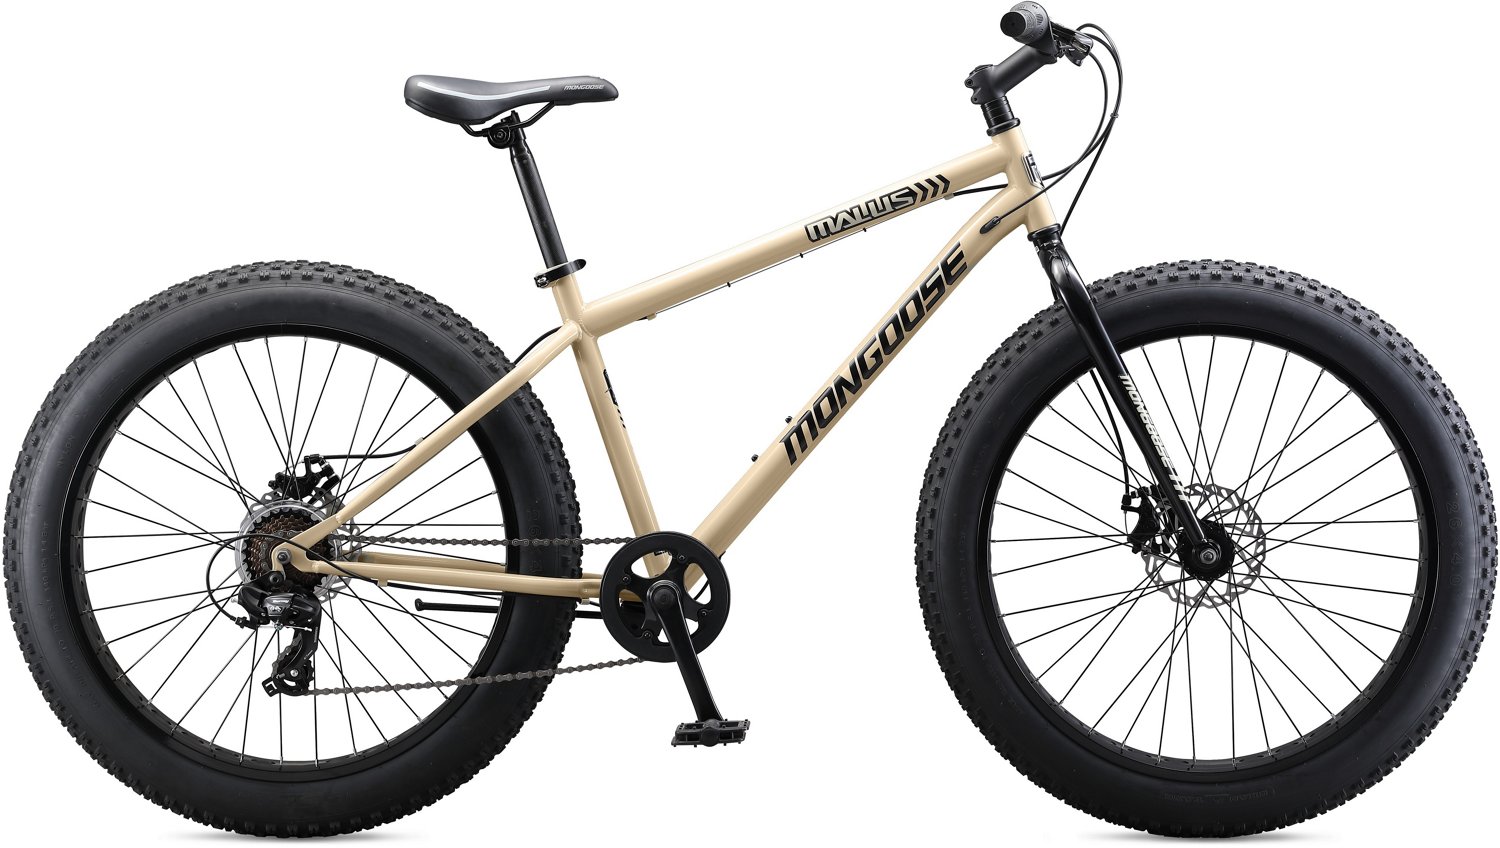 mongoose men's malus 26 in fat tire bicycle